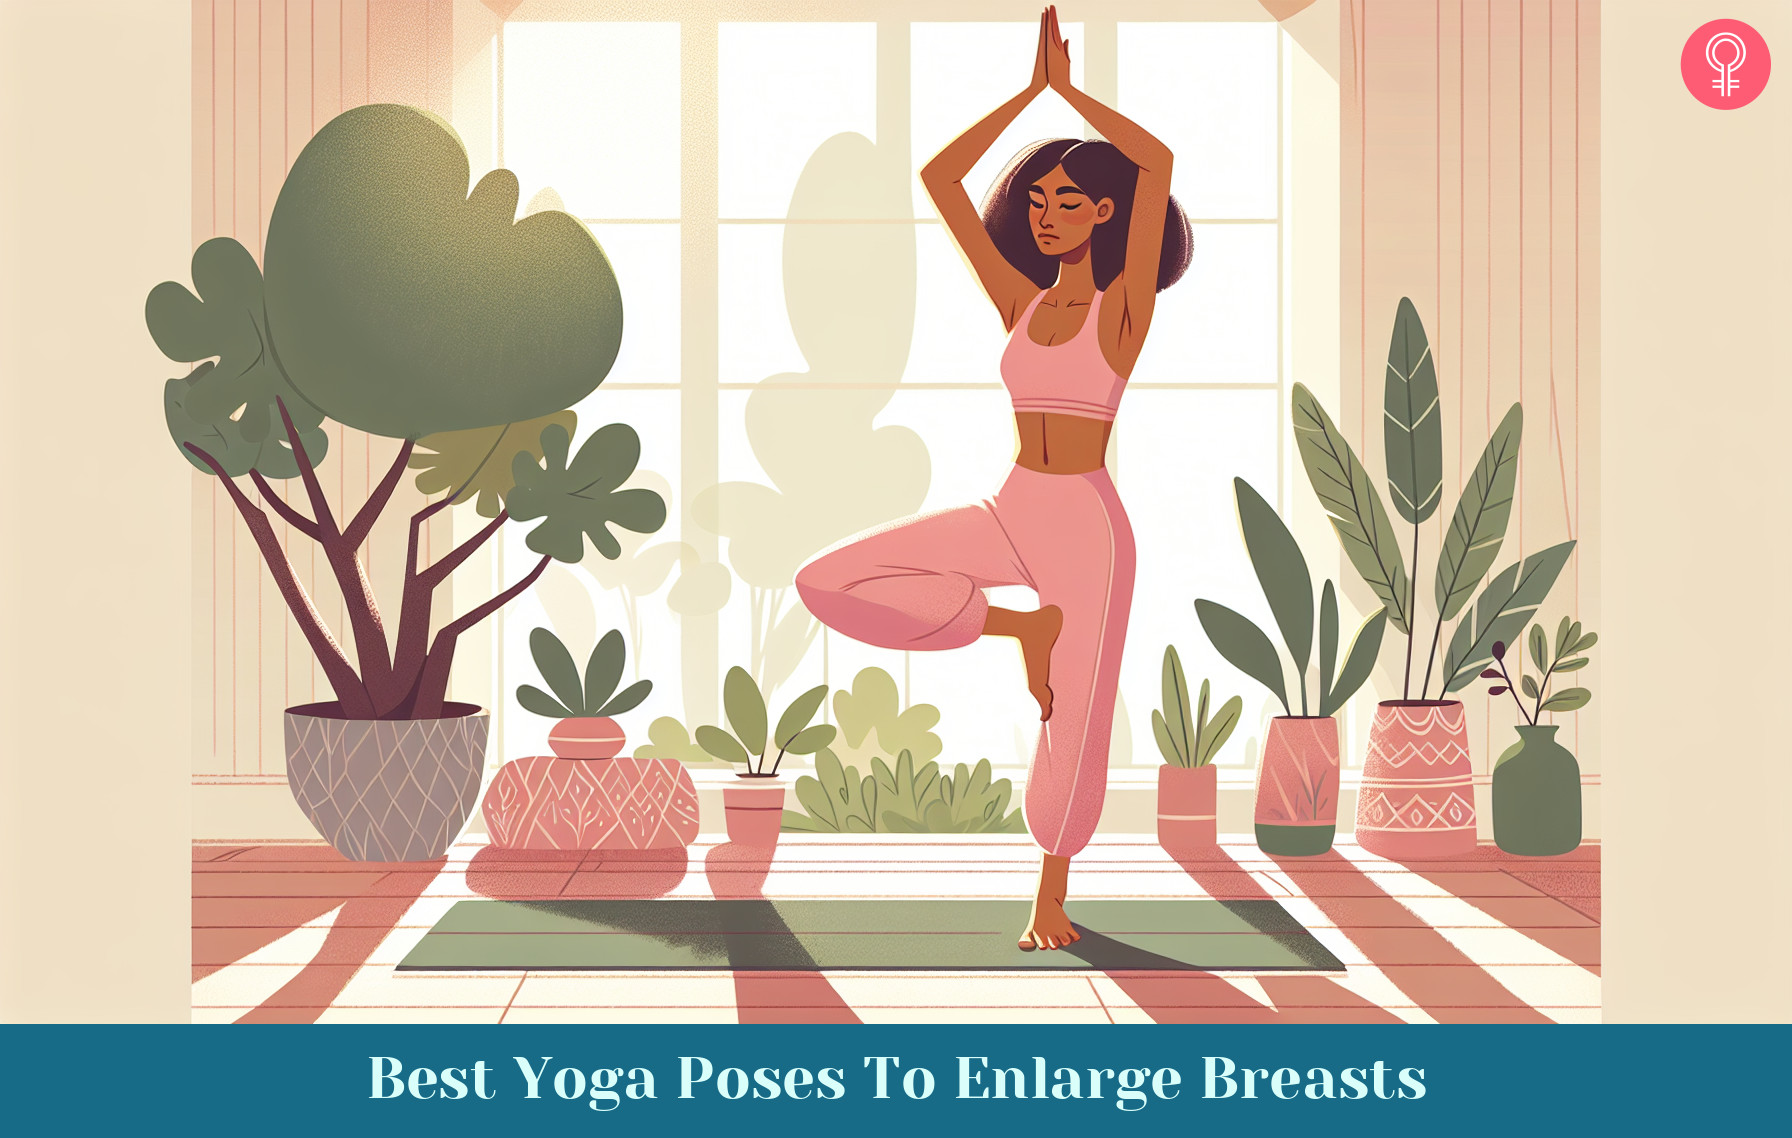 Yoga Poses To Enlarge Breasts